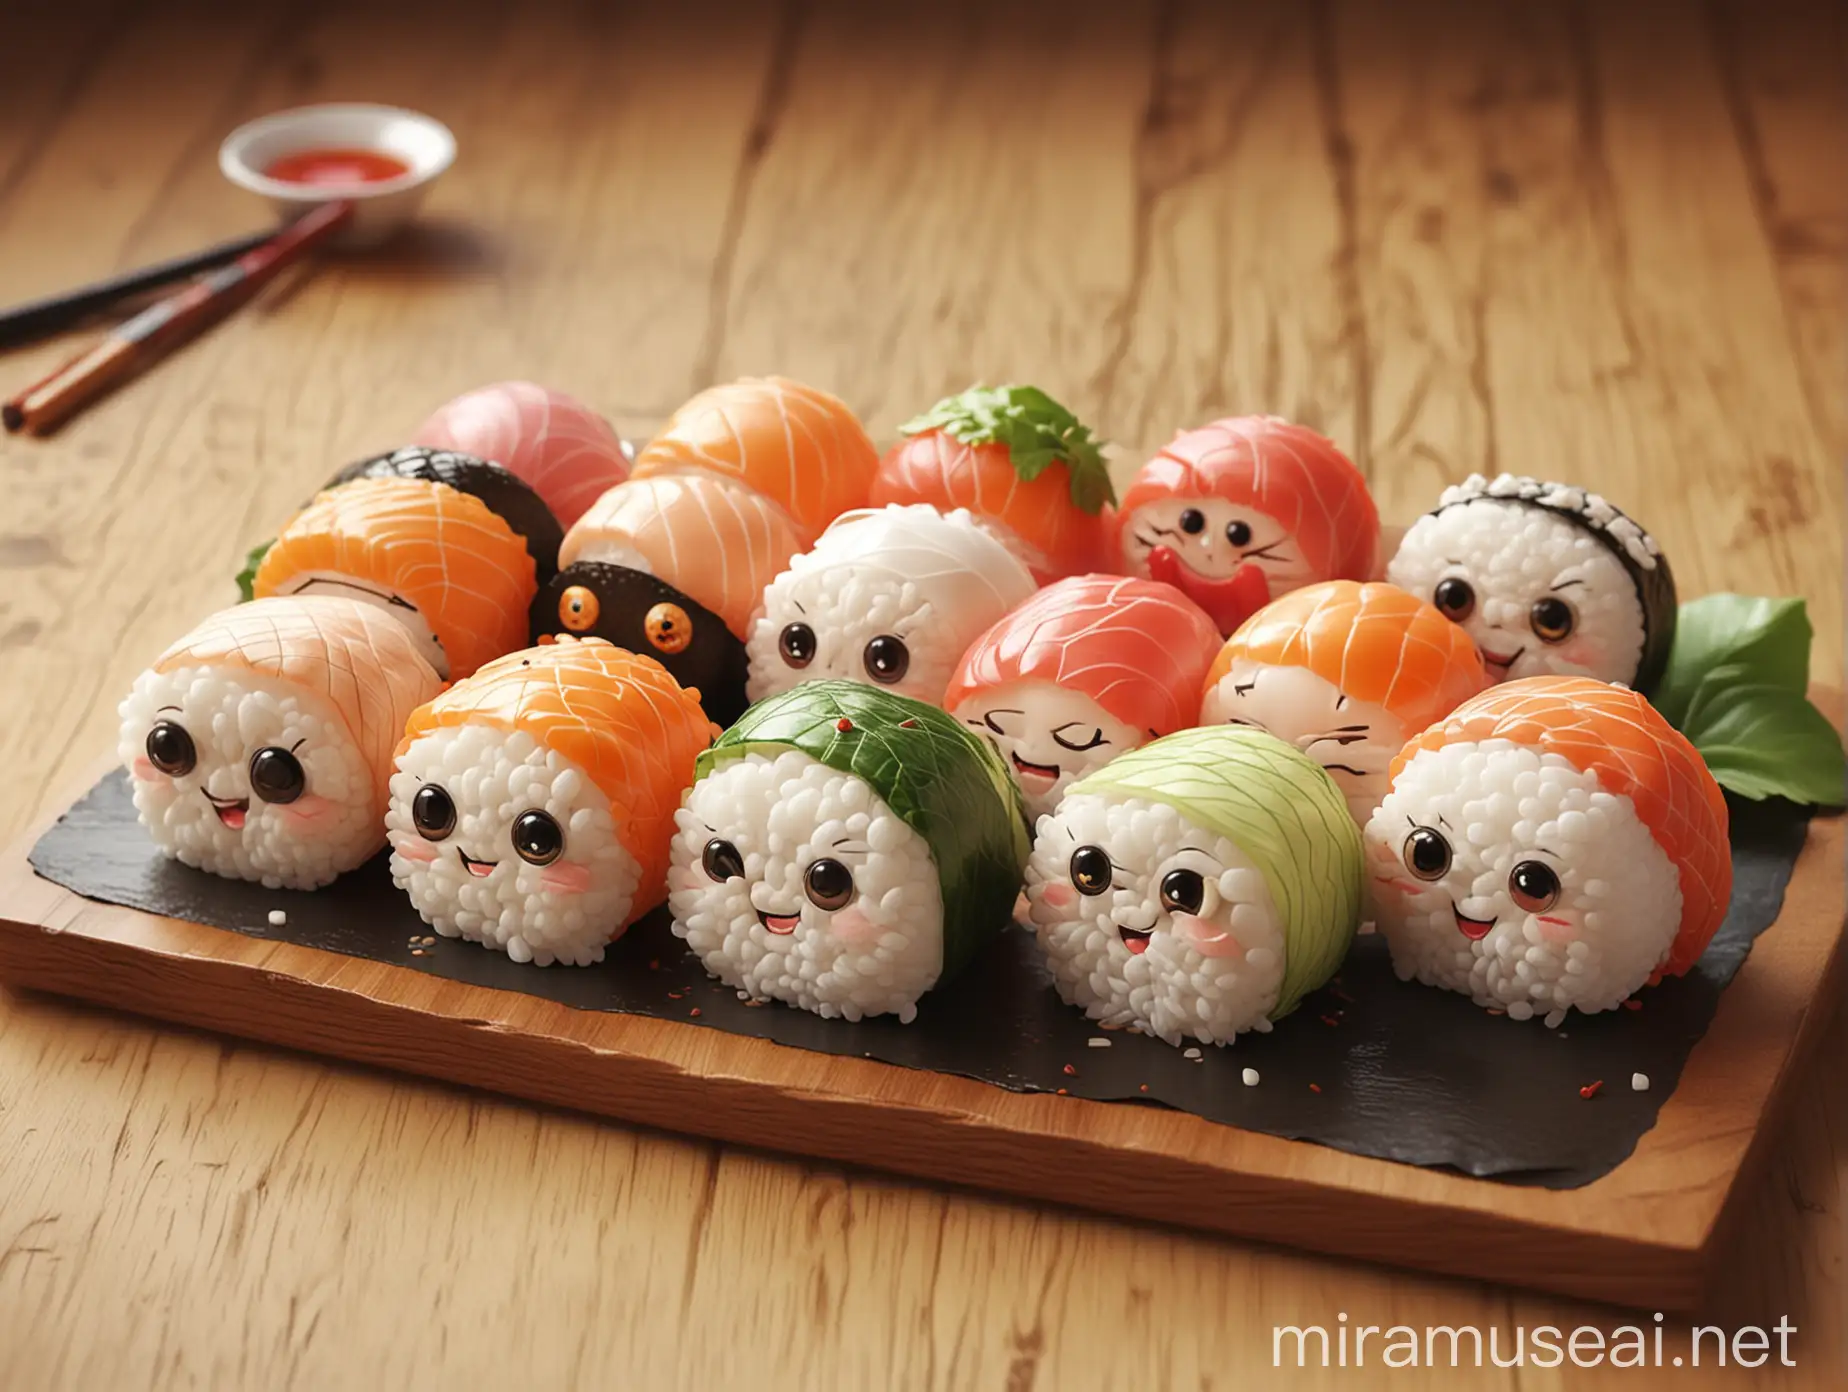 there are sushi rolls with faces and eyes on a table, cute 3 d render, cute! c4d, cute digital art, pop japonisme 3 d ultra detailed, adorable digital painting, cute detailed digital art, sushi, anime food, kawaii hq render, trend on behance 3 d art, trend on behance 3d art, birthday, joy, laughter, colorful balloons